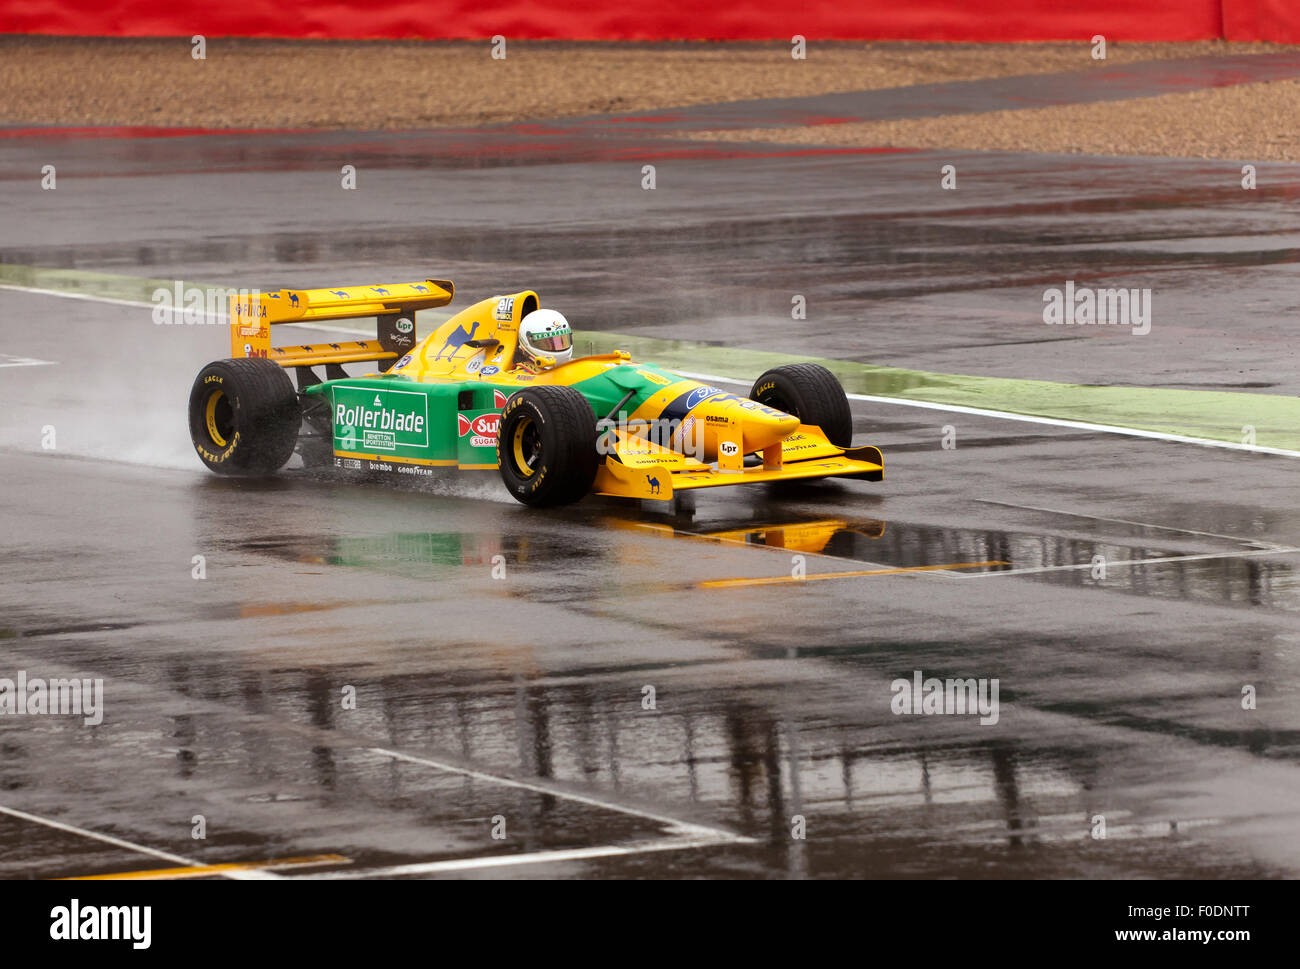 A 1993, Benetton B193 Formula 1 car being demonstrated at the Silverstone  Classic 2015 Stock Photo - Alamy